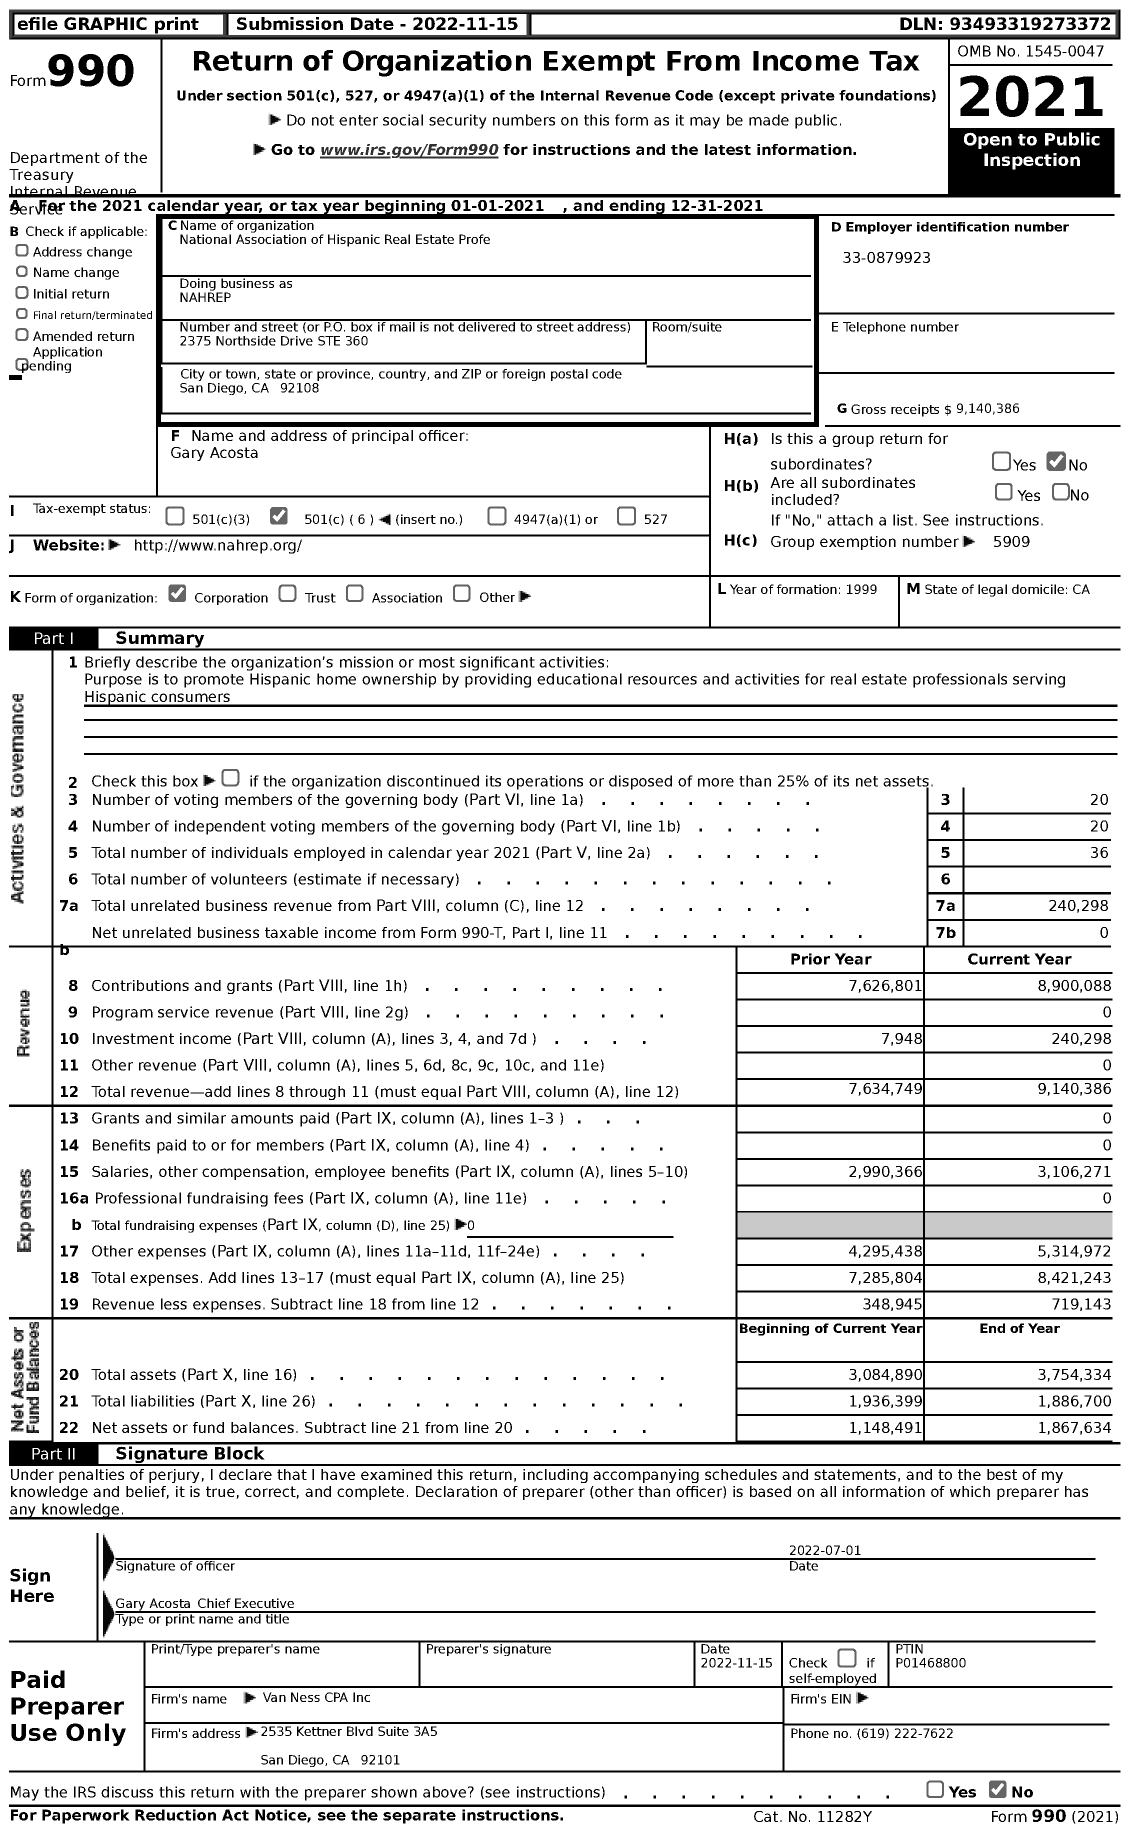 Image of first page of 2021 Form 990 for National Associaton of Hispanic Real Estate Professionals (NAHREP)